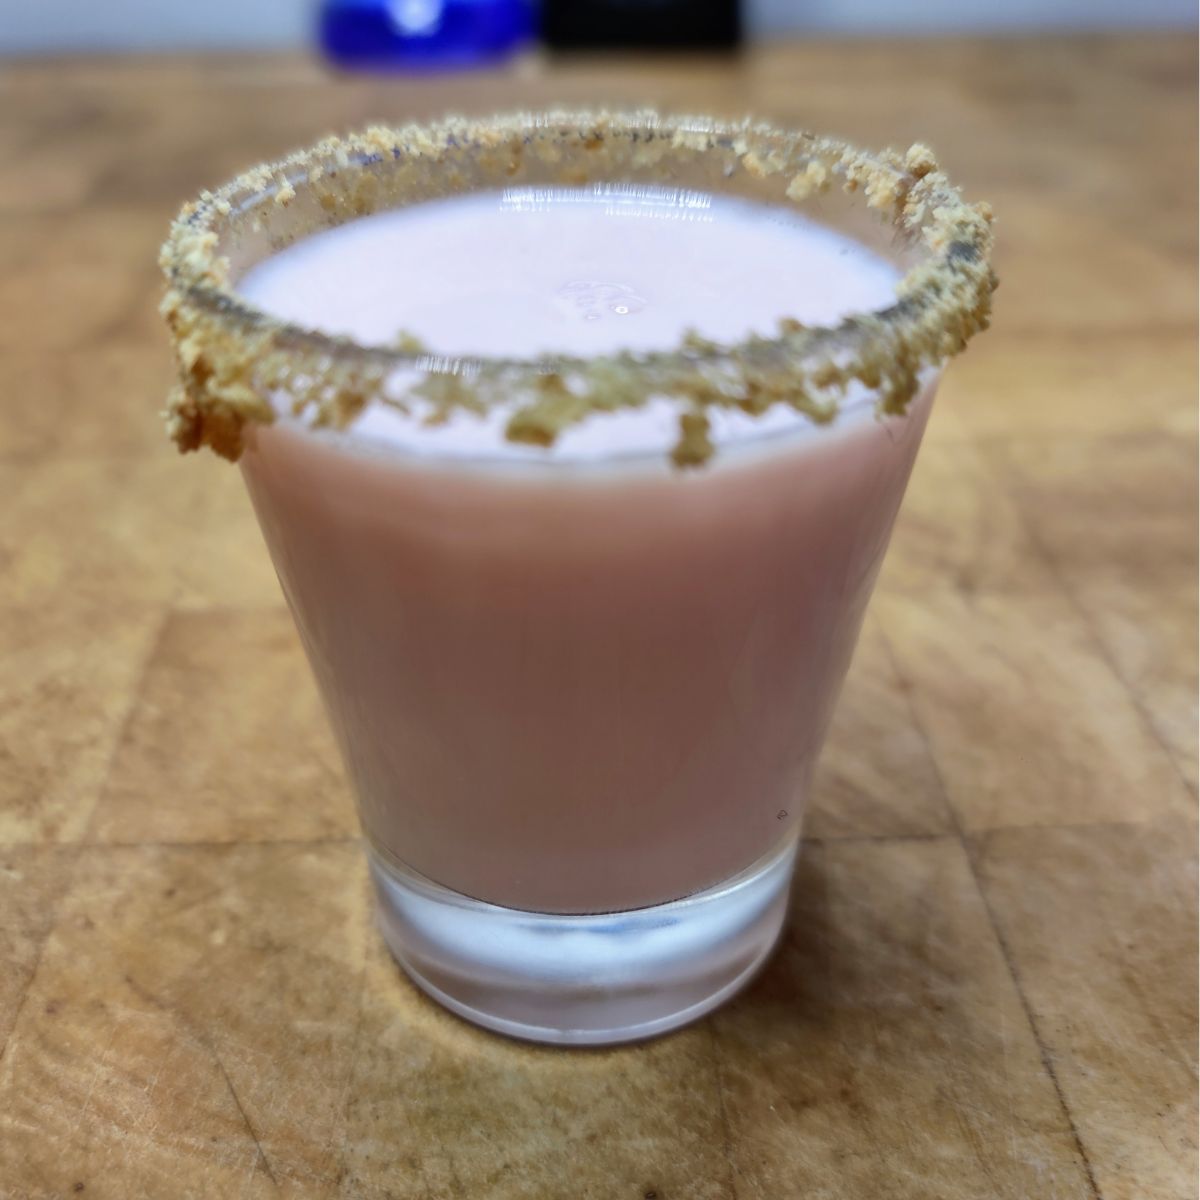 Strawberry shortcake shot on a wooden table.